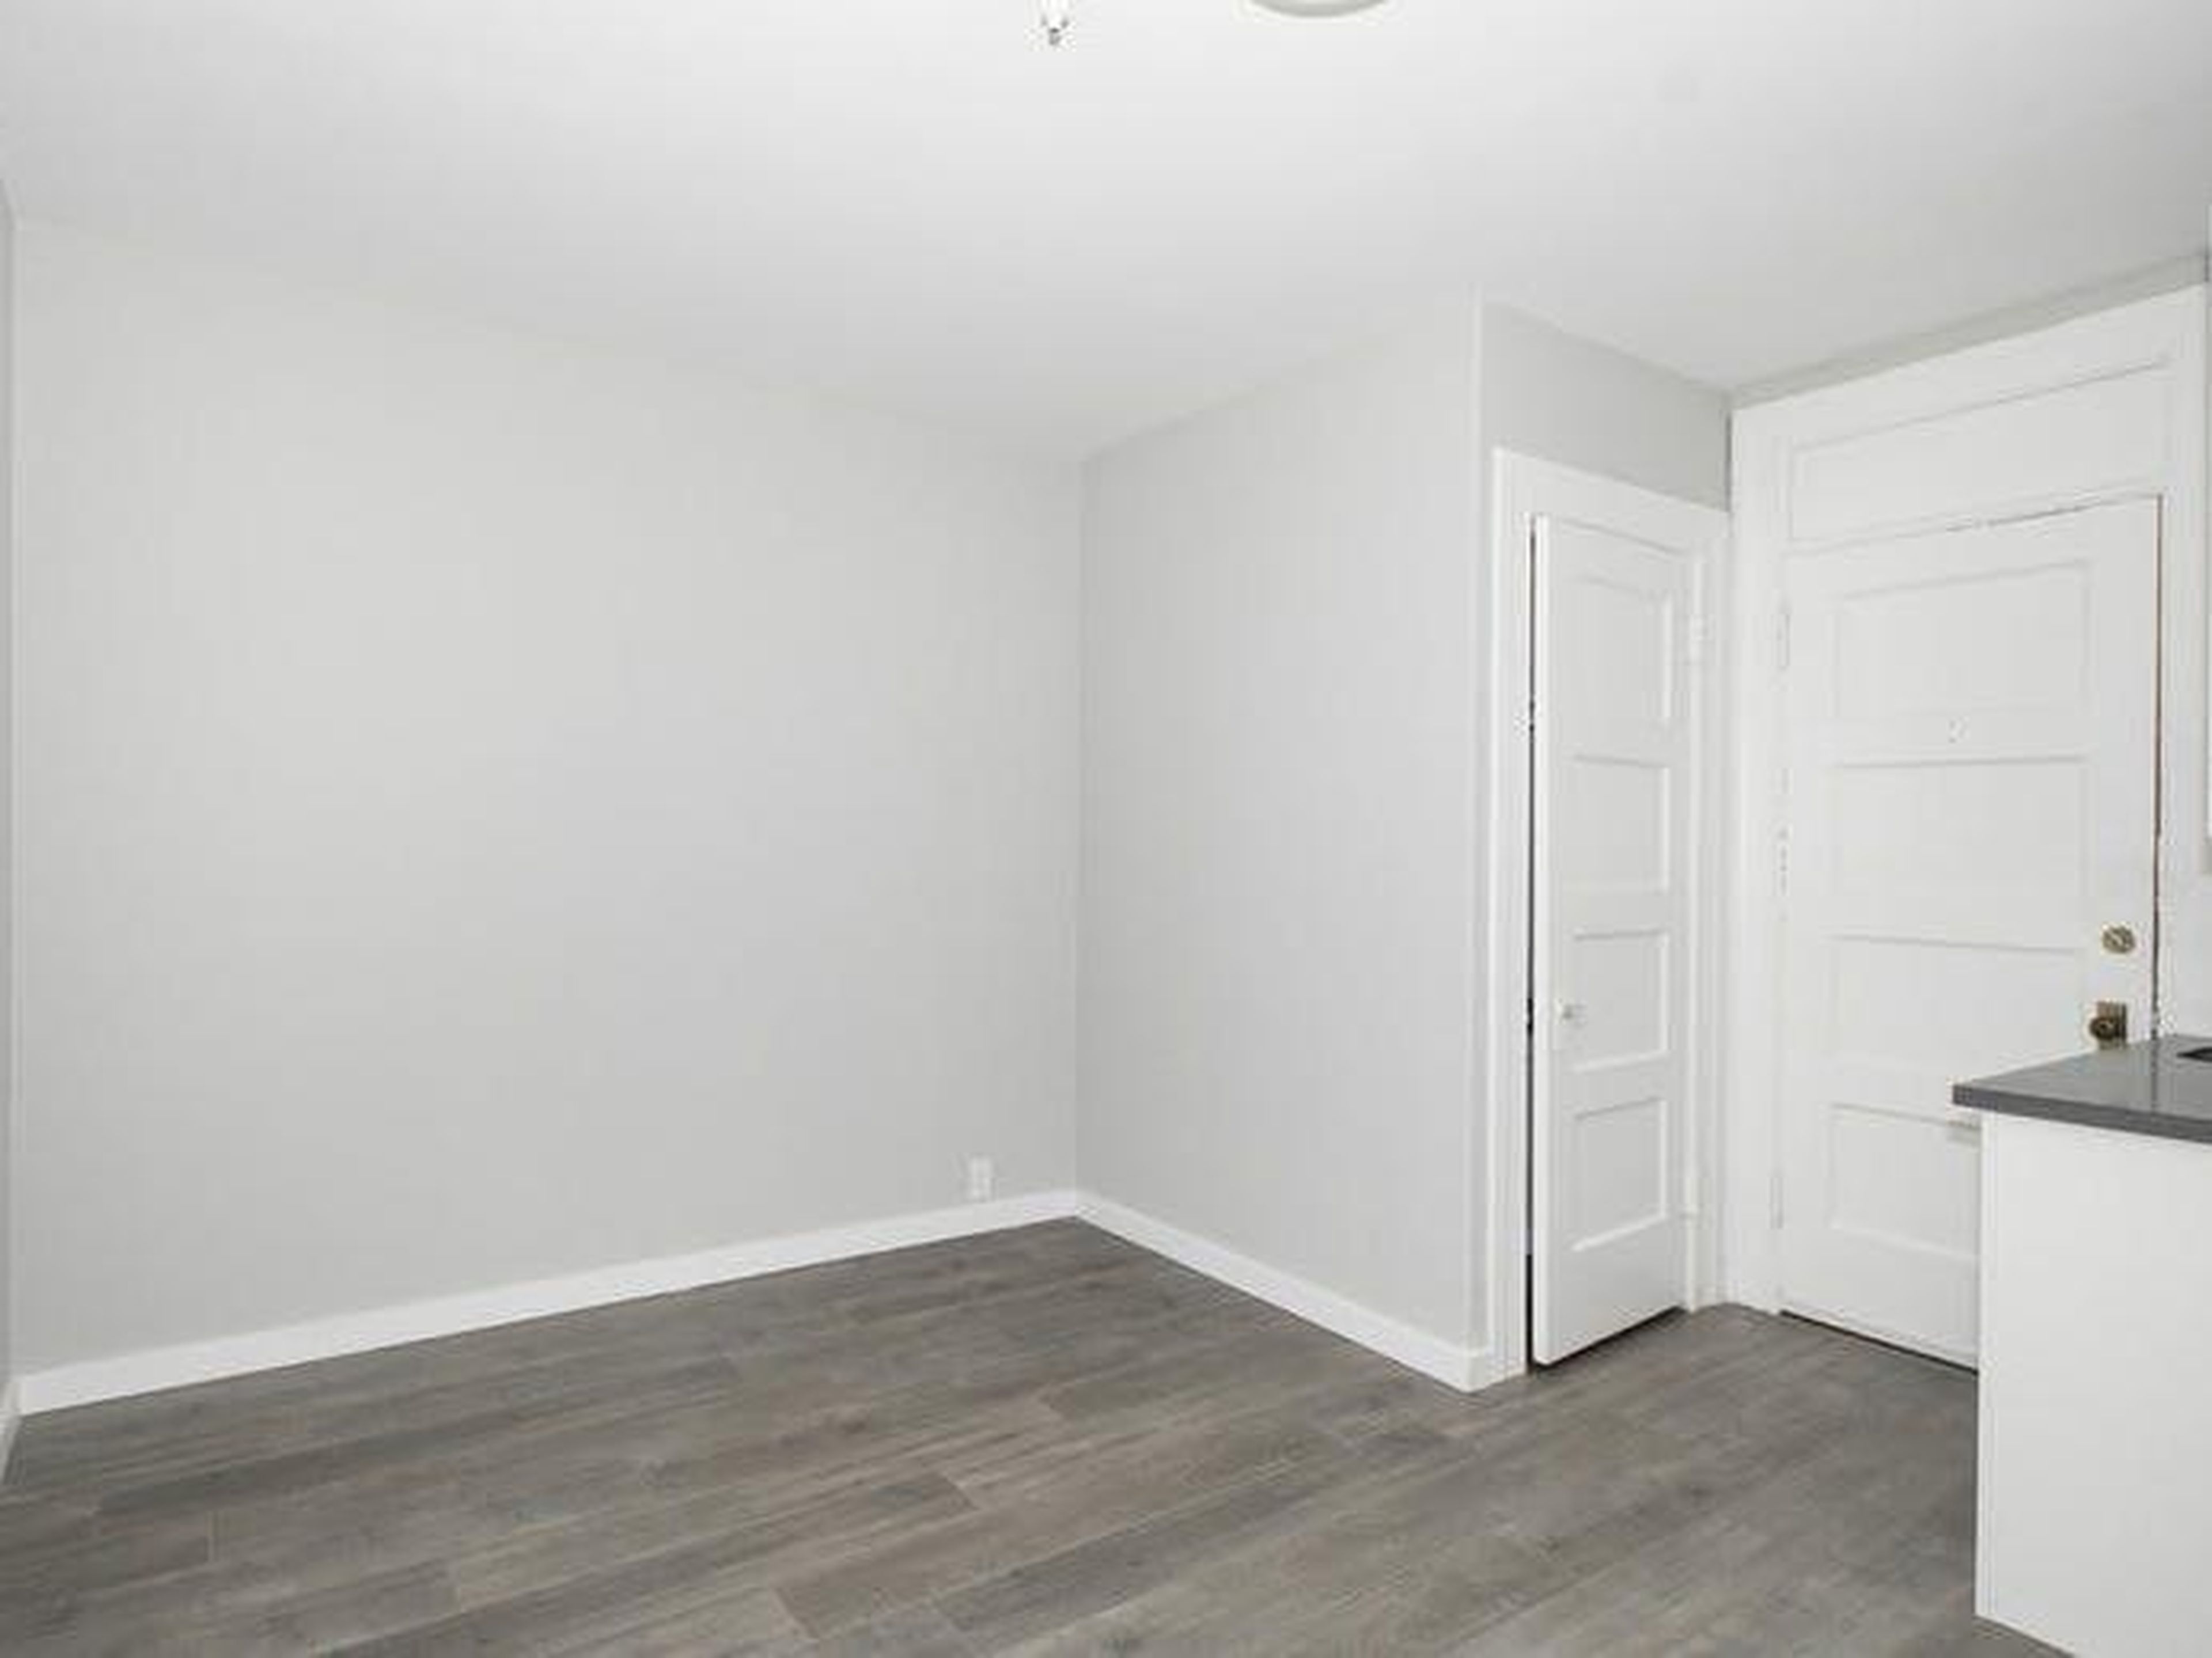 Beyond that, the studio has one window and a space heater. According to the listing, the unit comes with a dishwasher and in-unit laundry, but we couldn't find them in the listing photos — or, frankly, imagine where they could